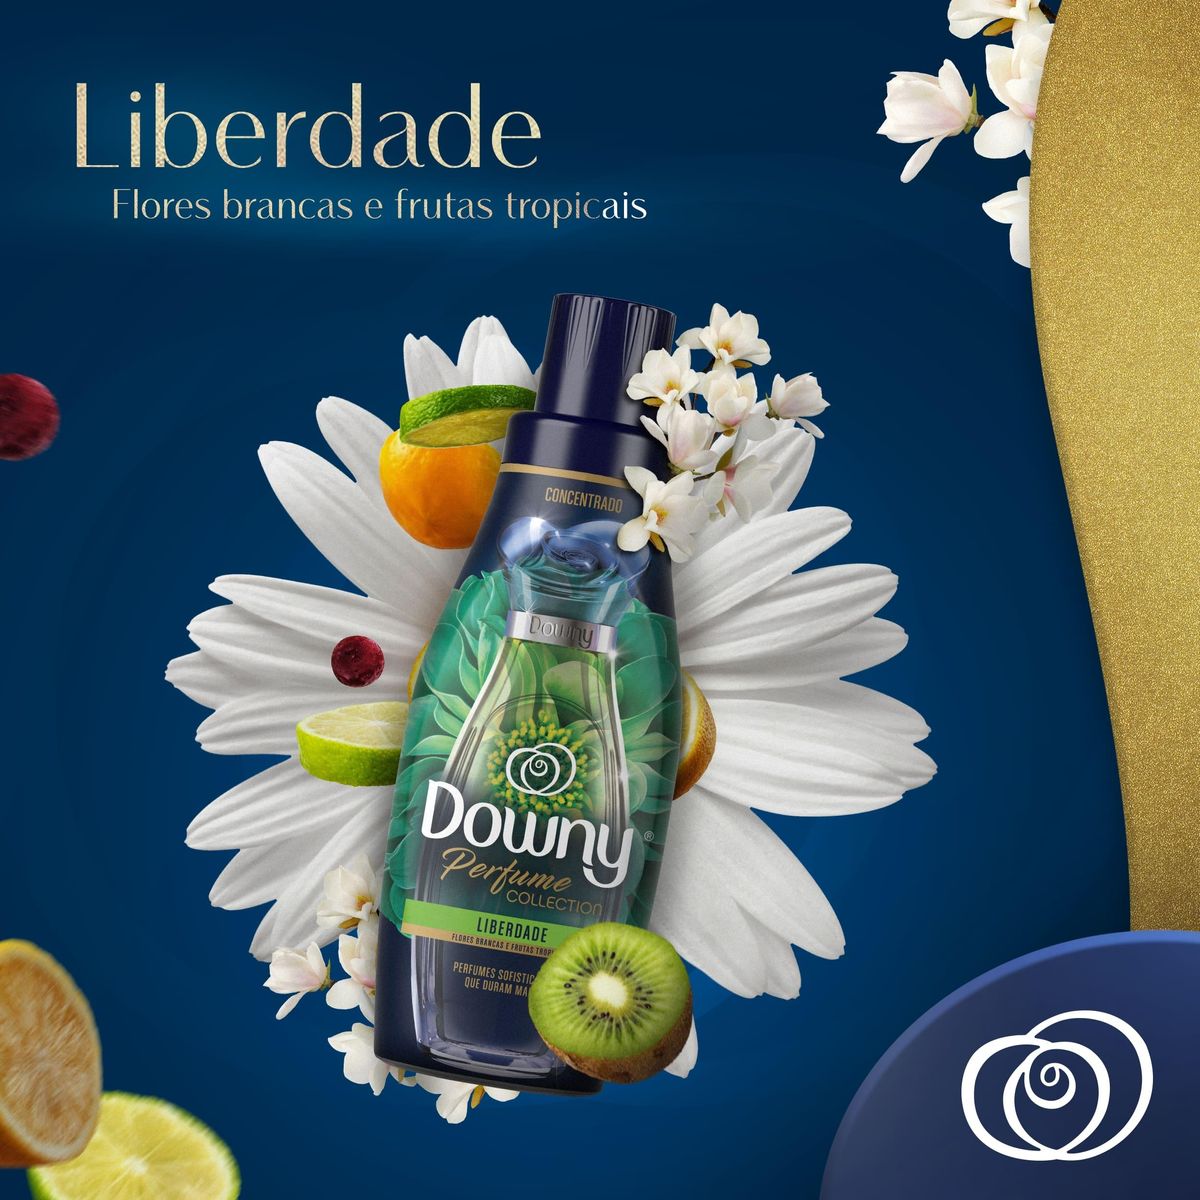 Amaciante Conc. Downy Perfume Collection Liberdade 900ml image number 6